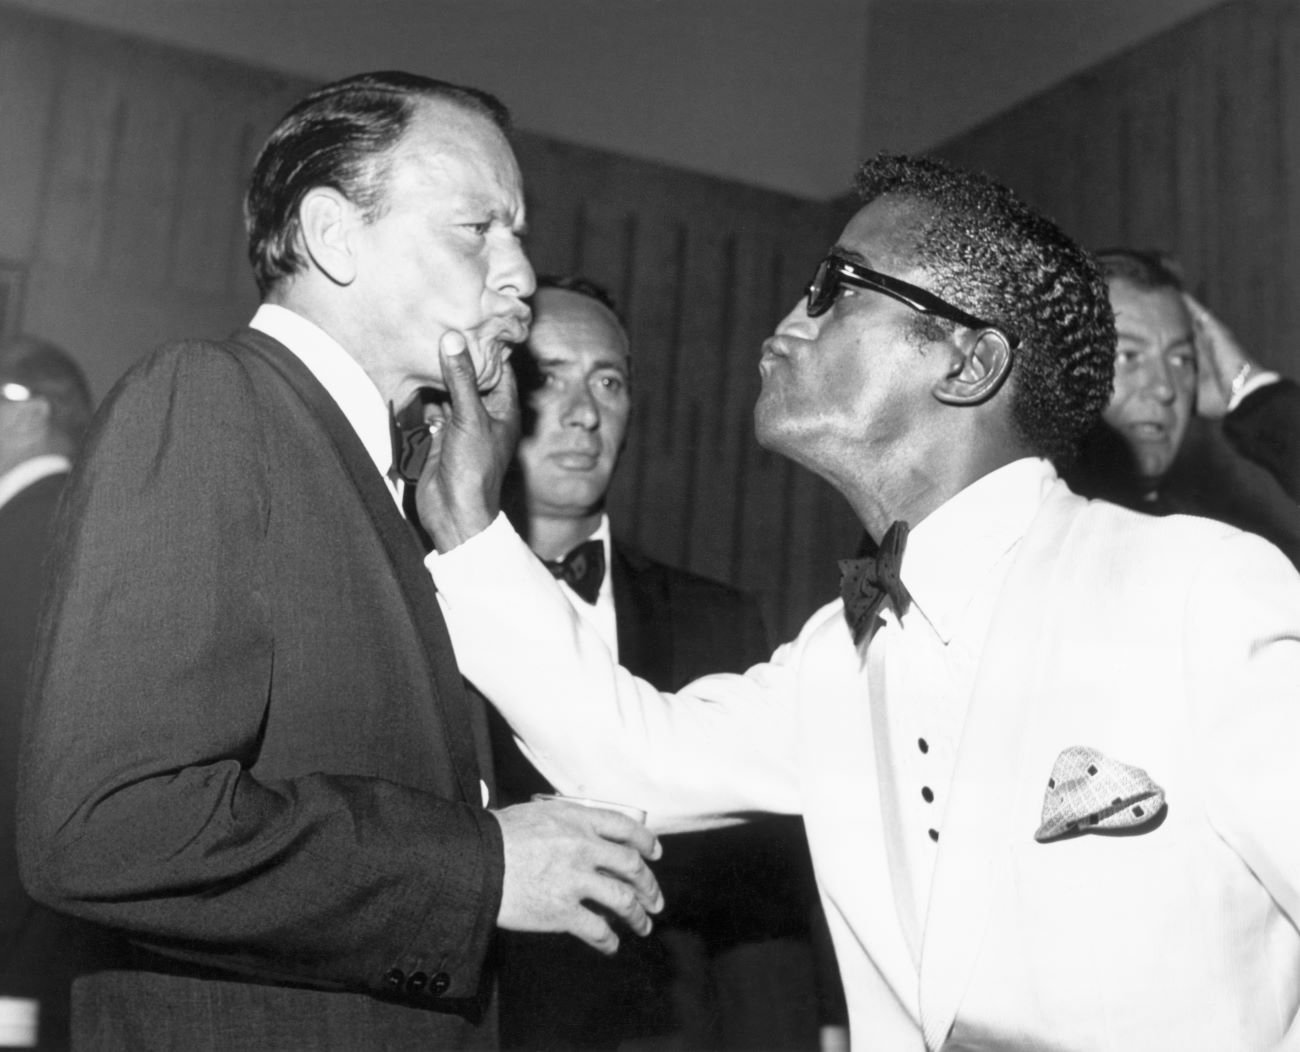 A black and white picture of Sammy Davis Jr. grabbing Frank Sinatra's cheeks. Both men have their lips pursed.